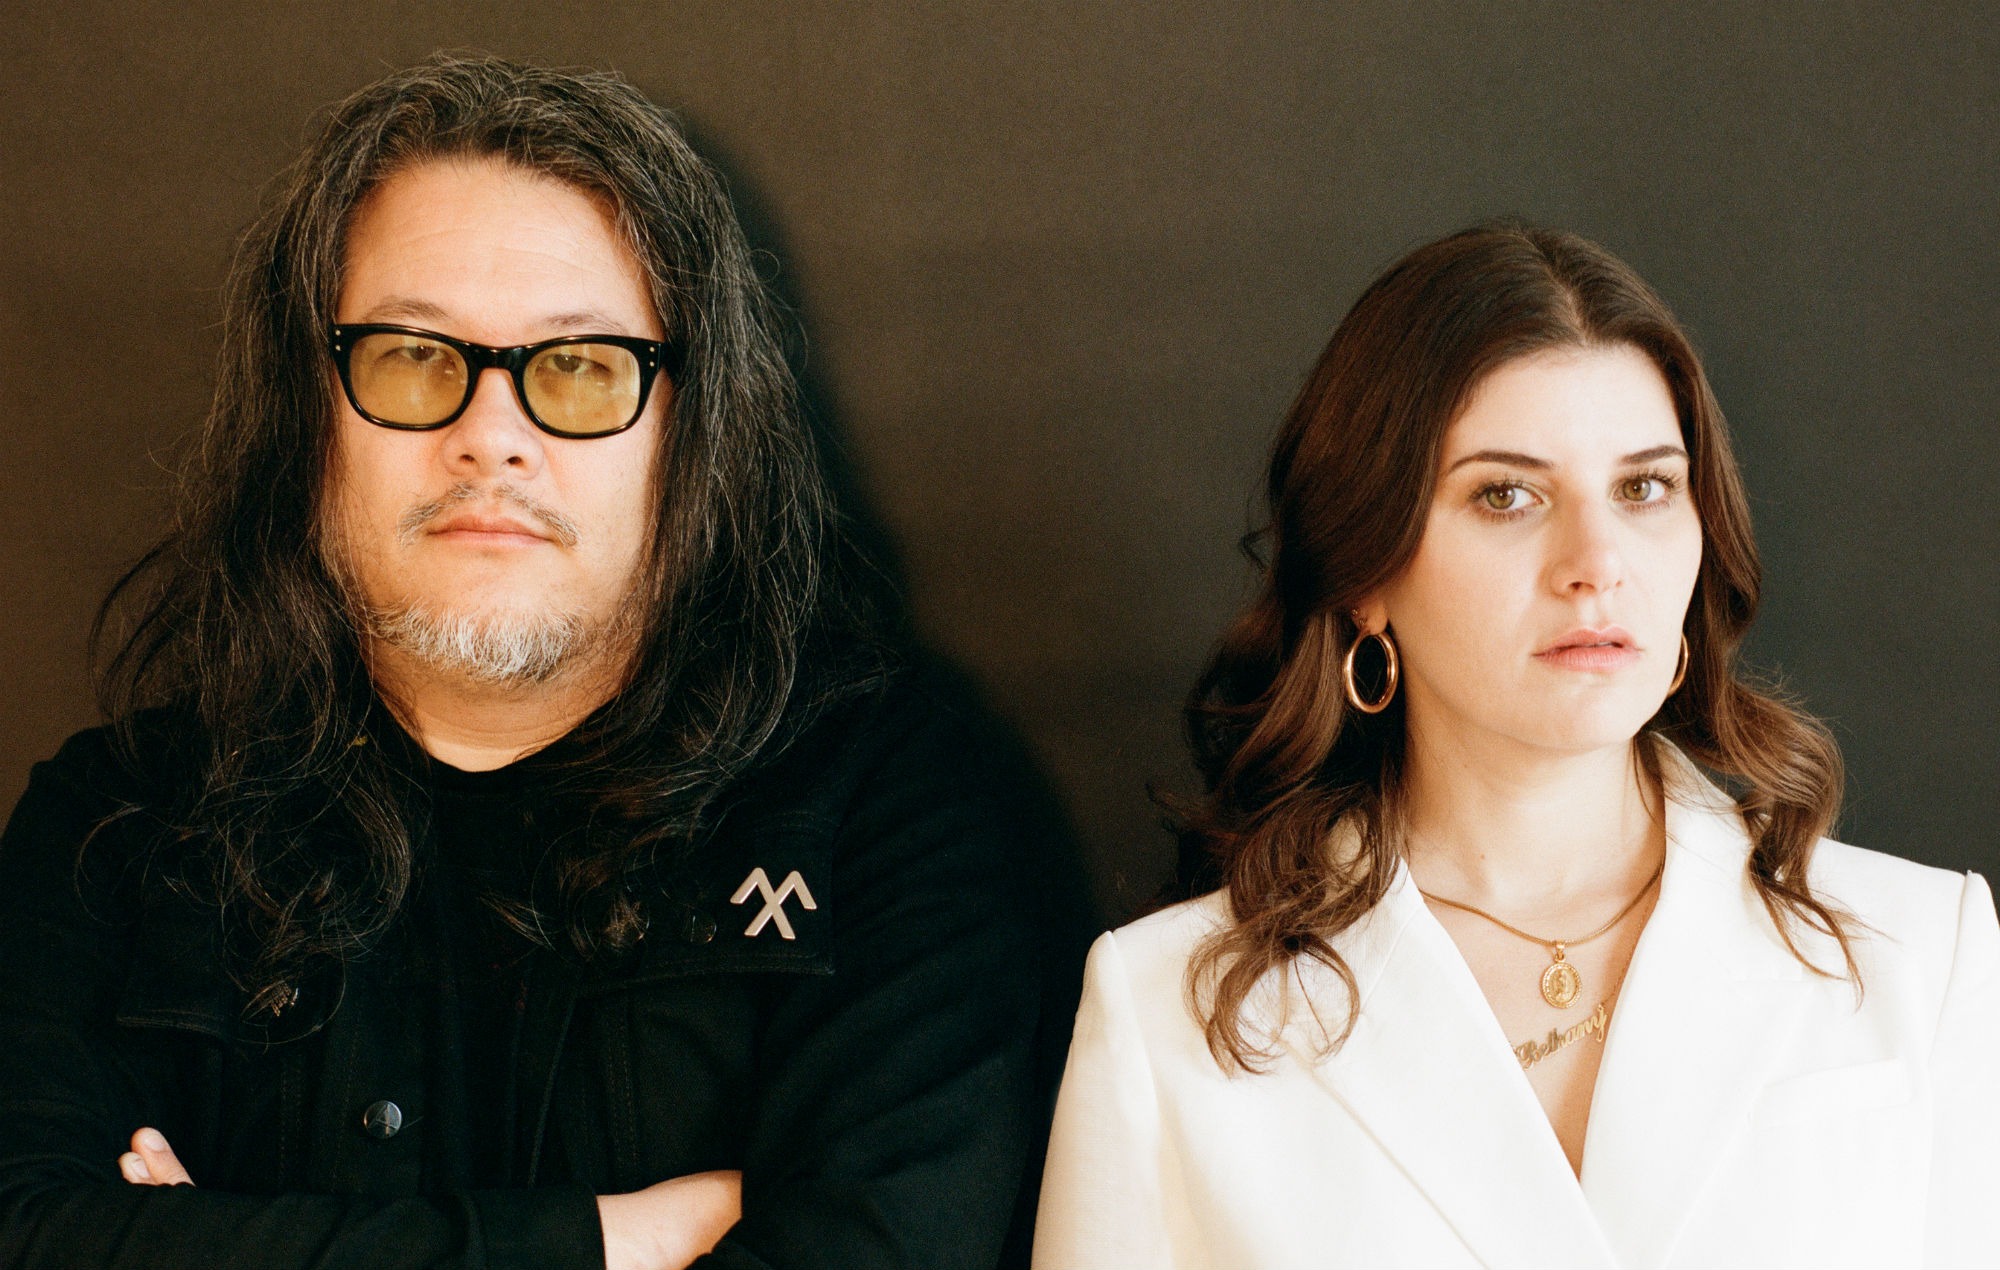 Best Coast’s Bethany Cosentino: “I questioned whether I would ever be able to make music again”